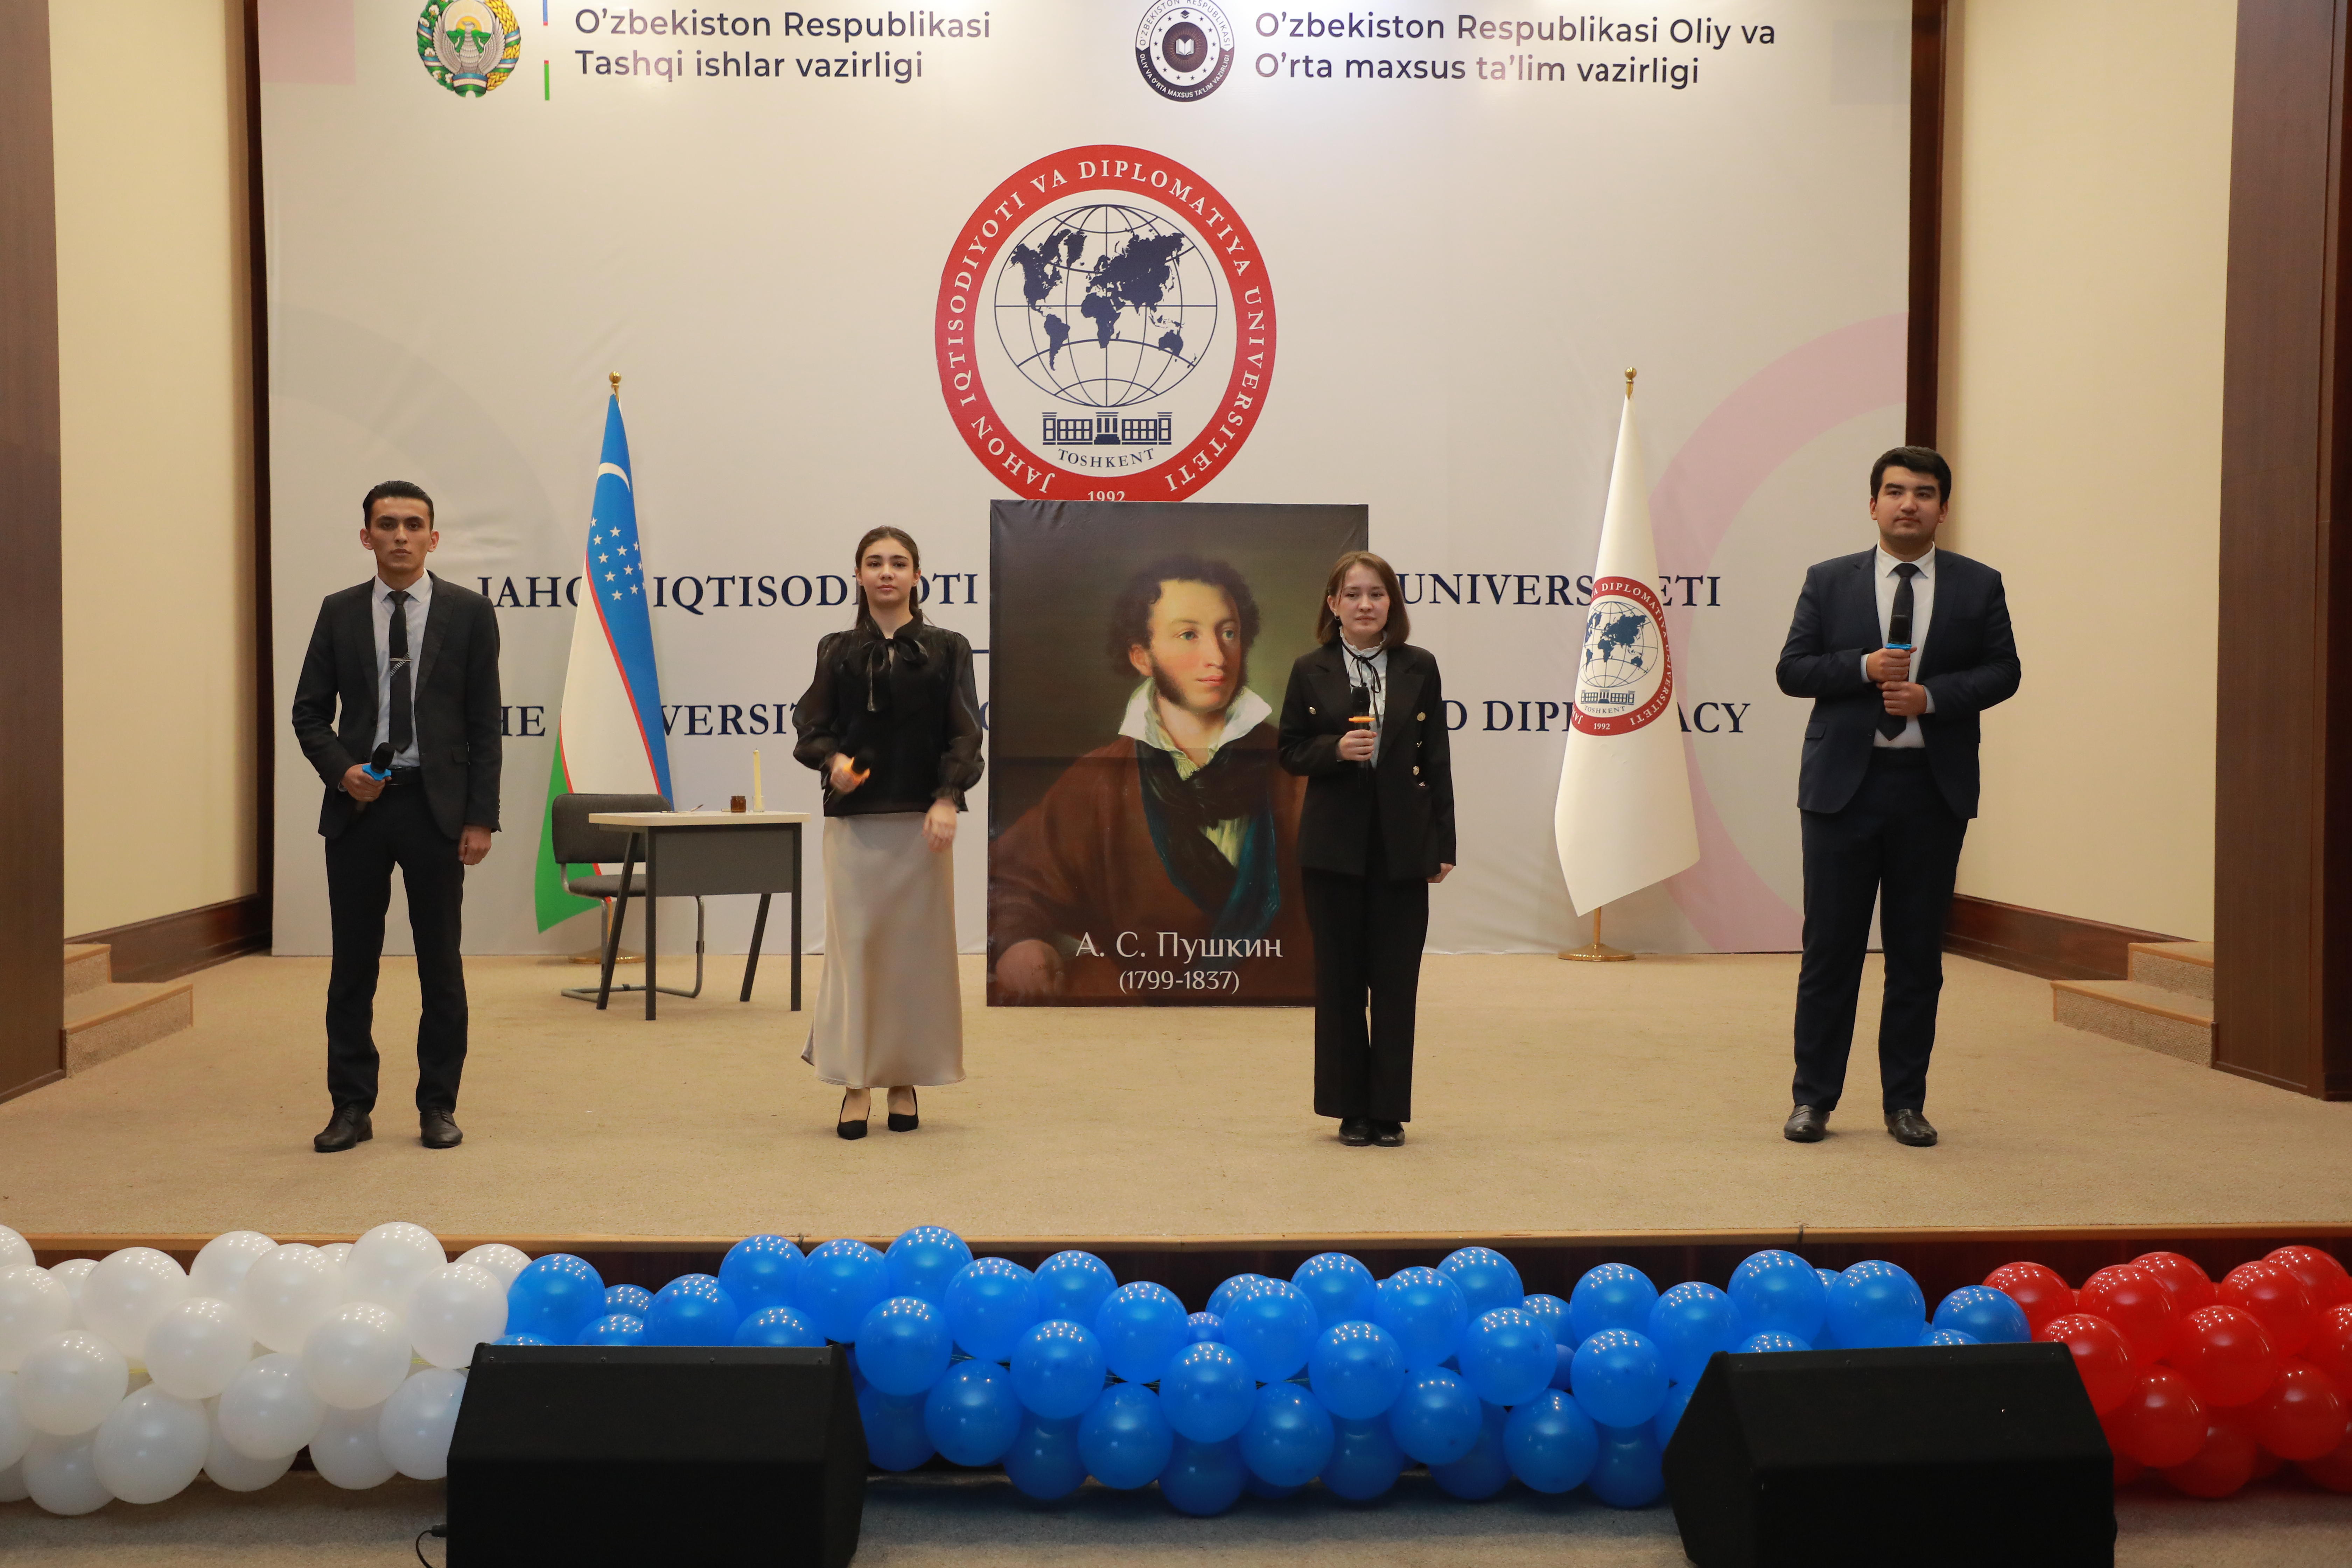 Russian Language Day was held at the University of World Economy and Diplomacy